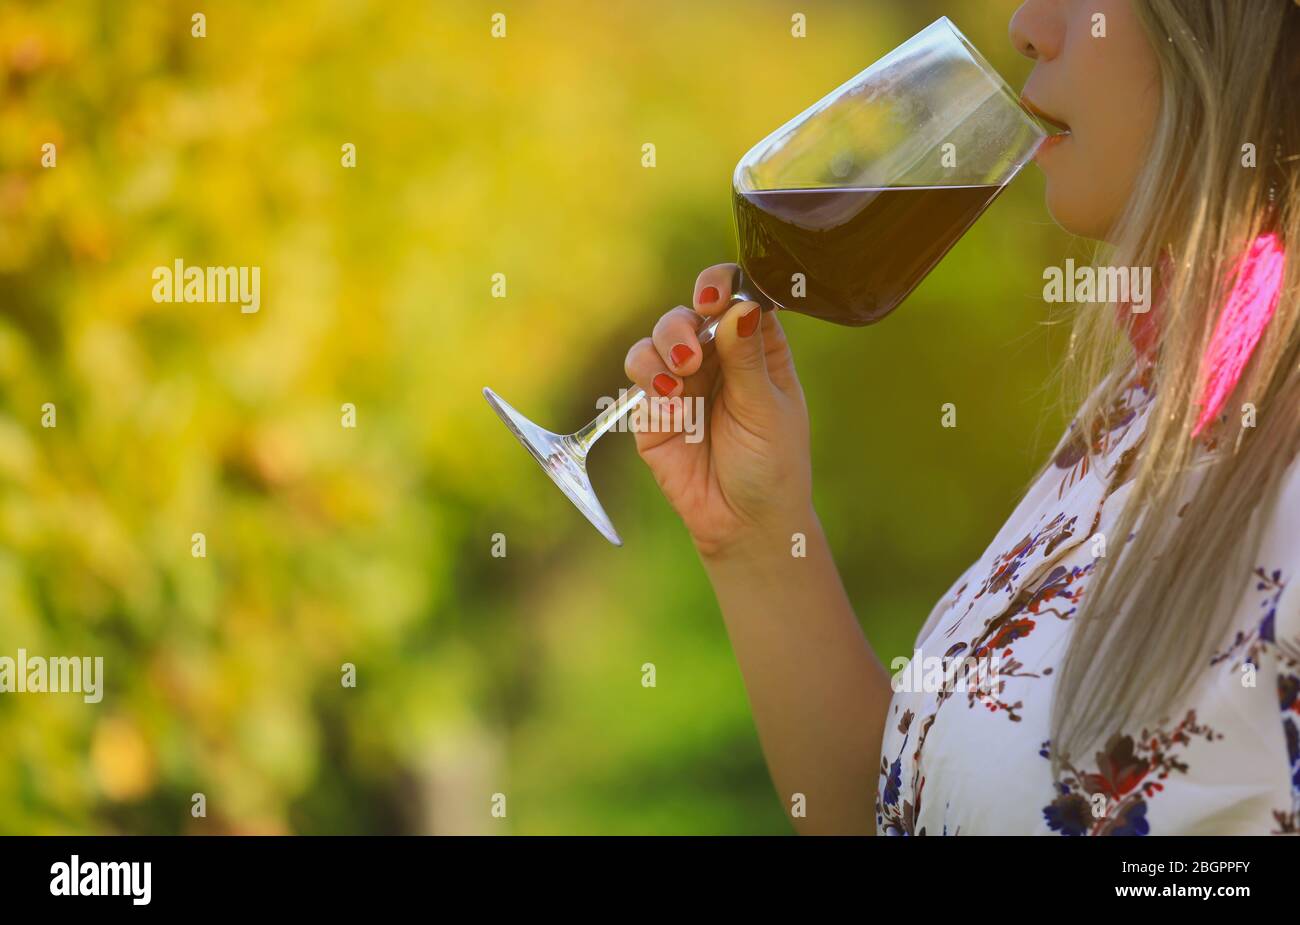 woman holding red wine glasse on the beach during sunset, celebration concept Stock Photo